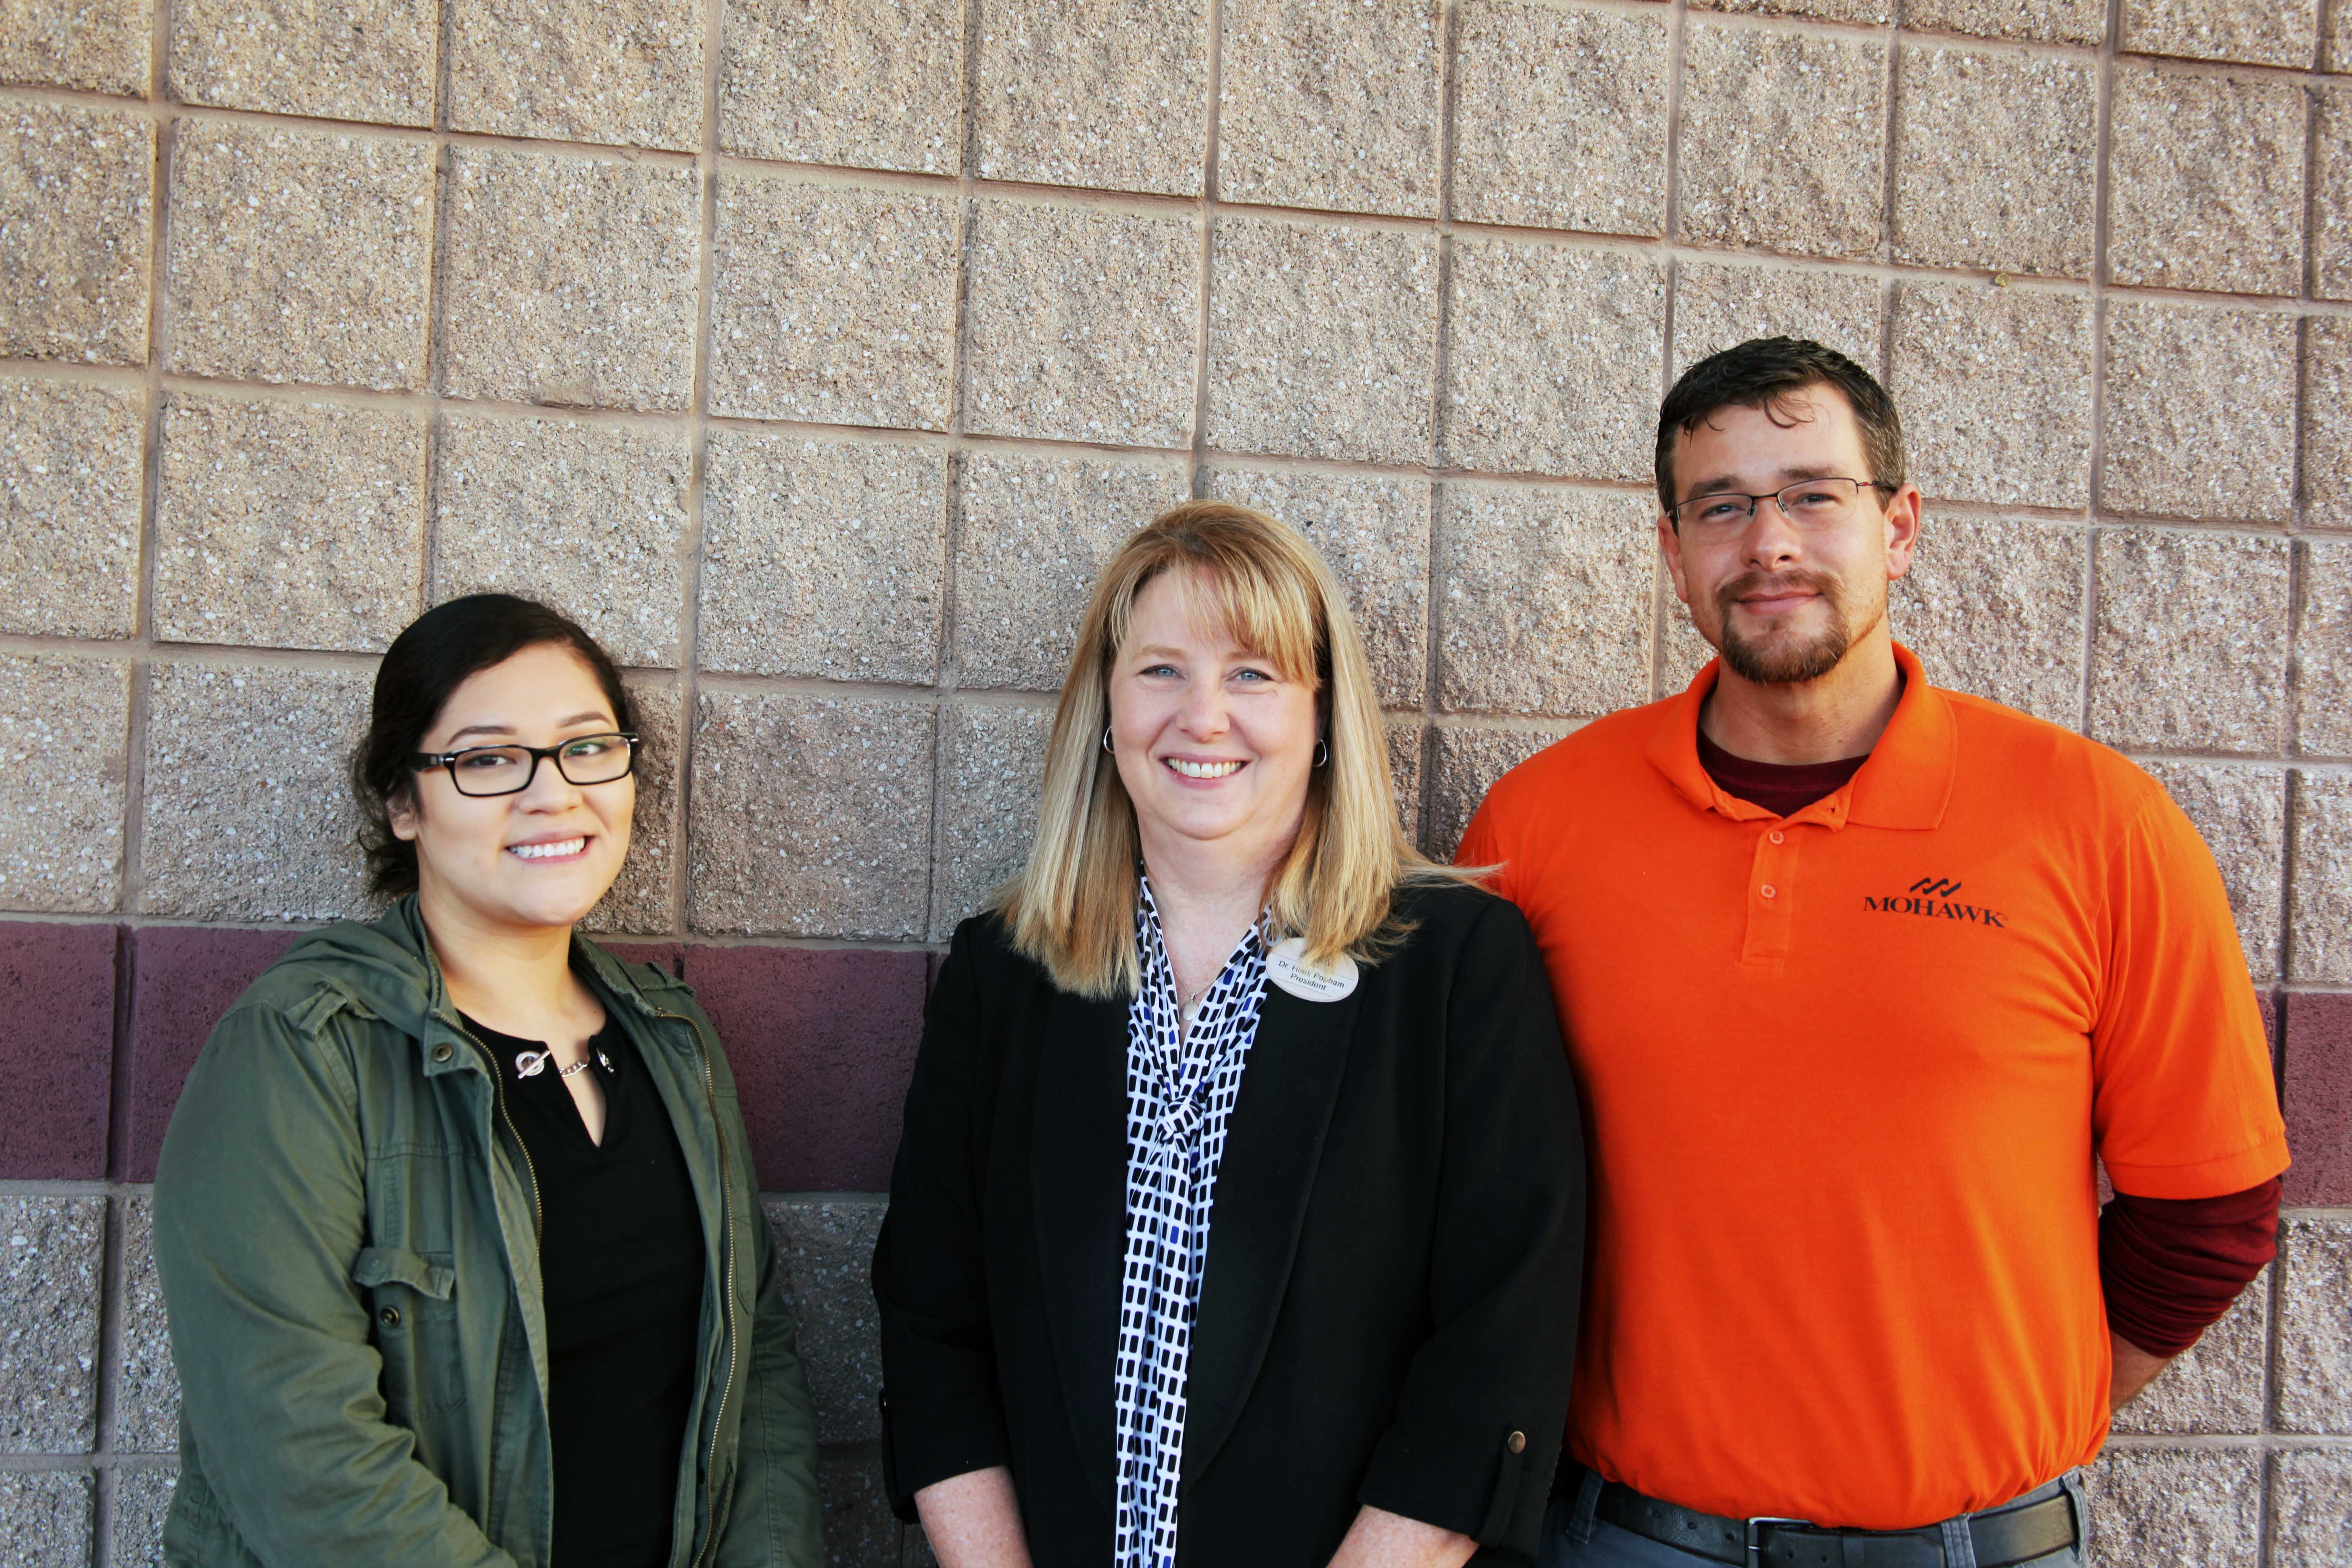 Flor Querido (left), Business Management student and president of the Phi Beta Lambda student organization at GNTC, stands with Dr. Heidi Popham (center), president of GNTC; and Carl Watts (right), graduate of the Electronics Technology and Industrial Systems Technology programs at GNTC before the “Good Morning Dalton” event held at the Dalton Convention Center.